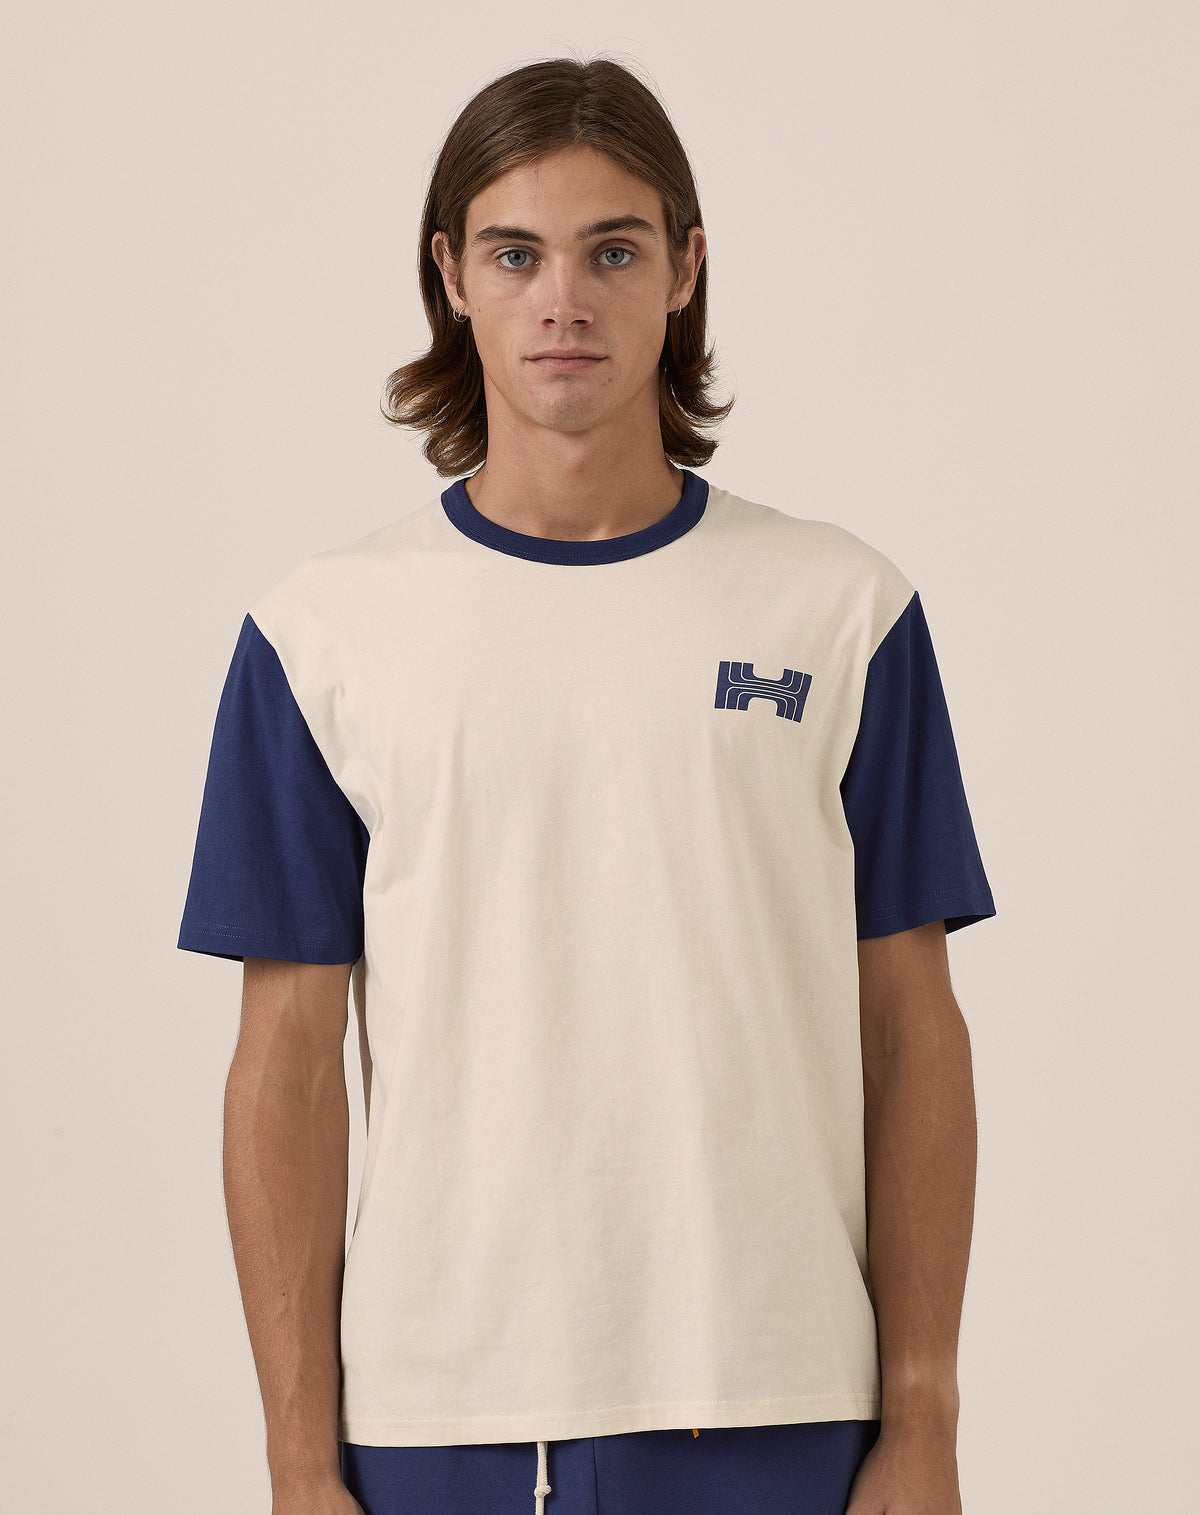 Athletic Tee- Ecru and Washed Navy